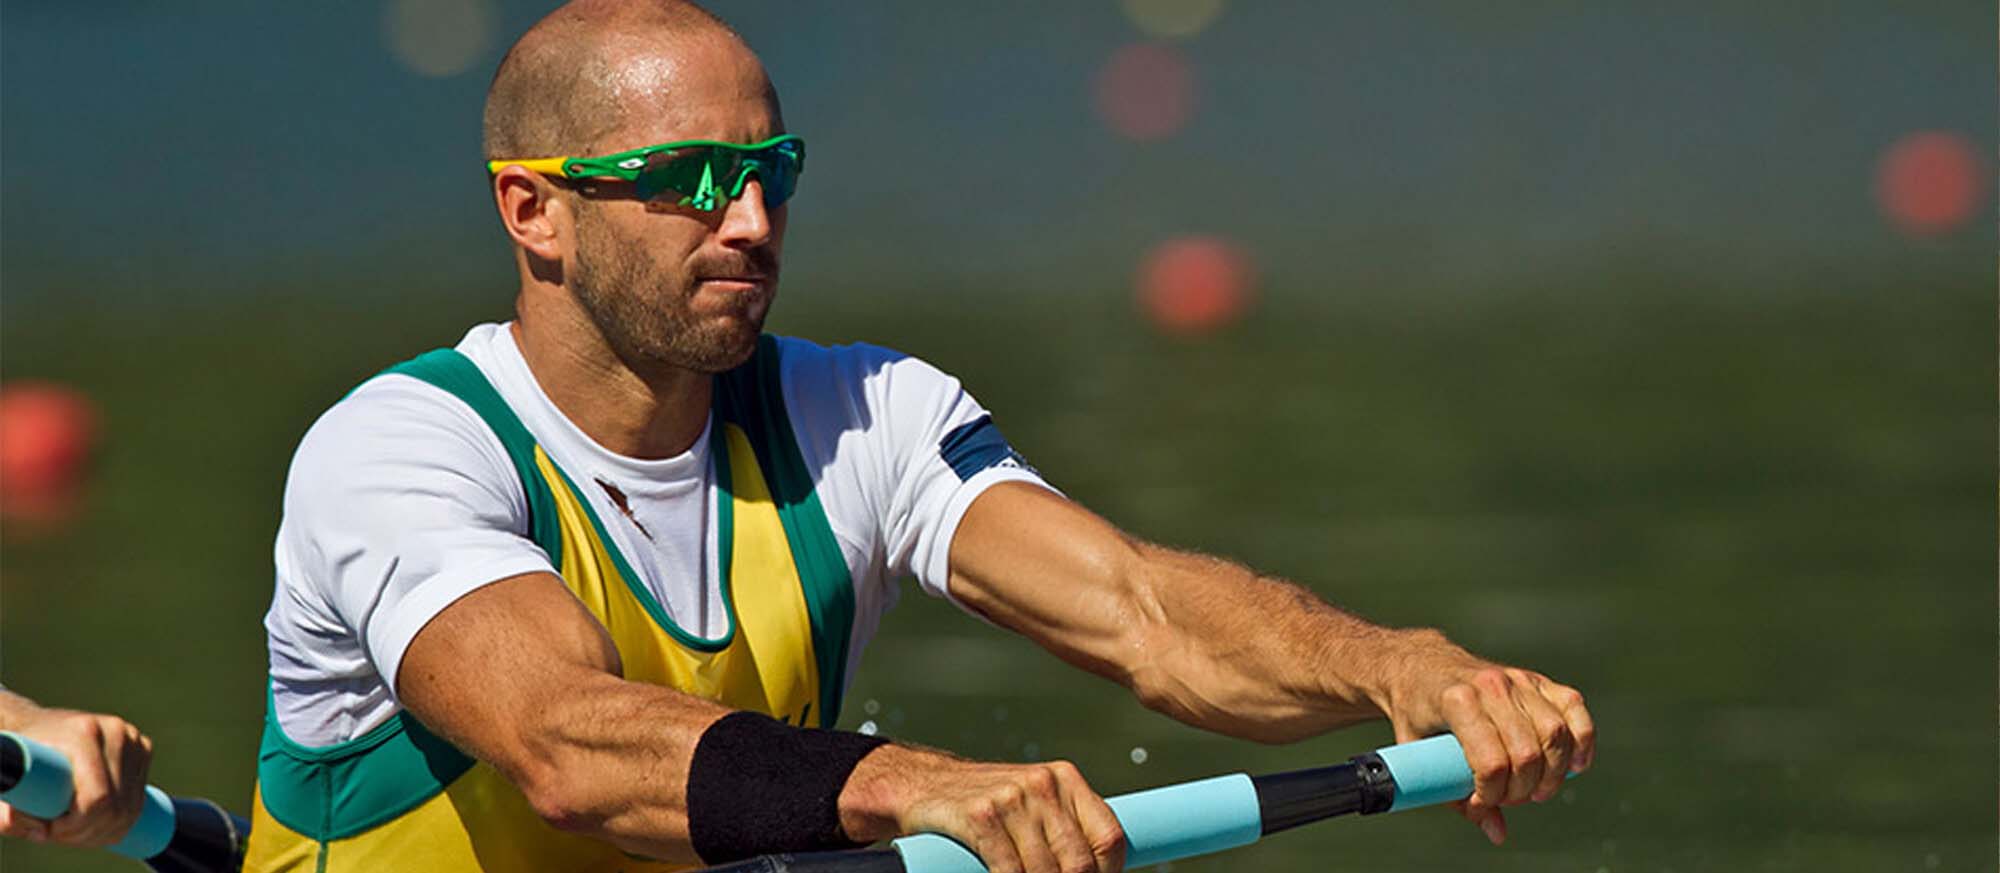 James Chapman competing in a rowing event at the Olympics